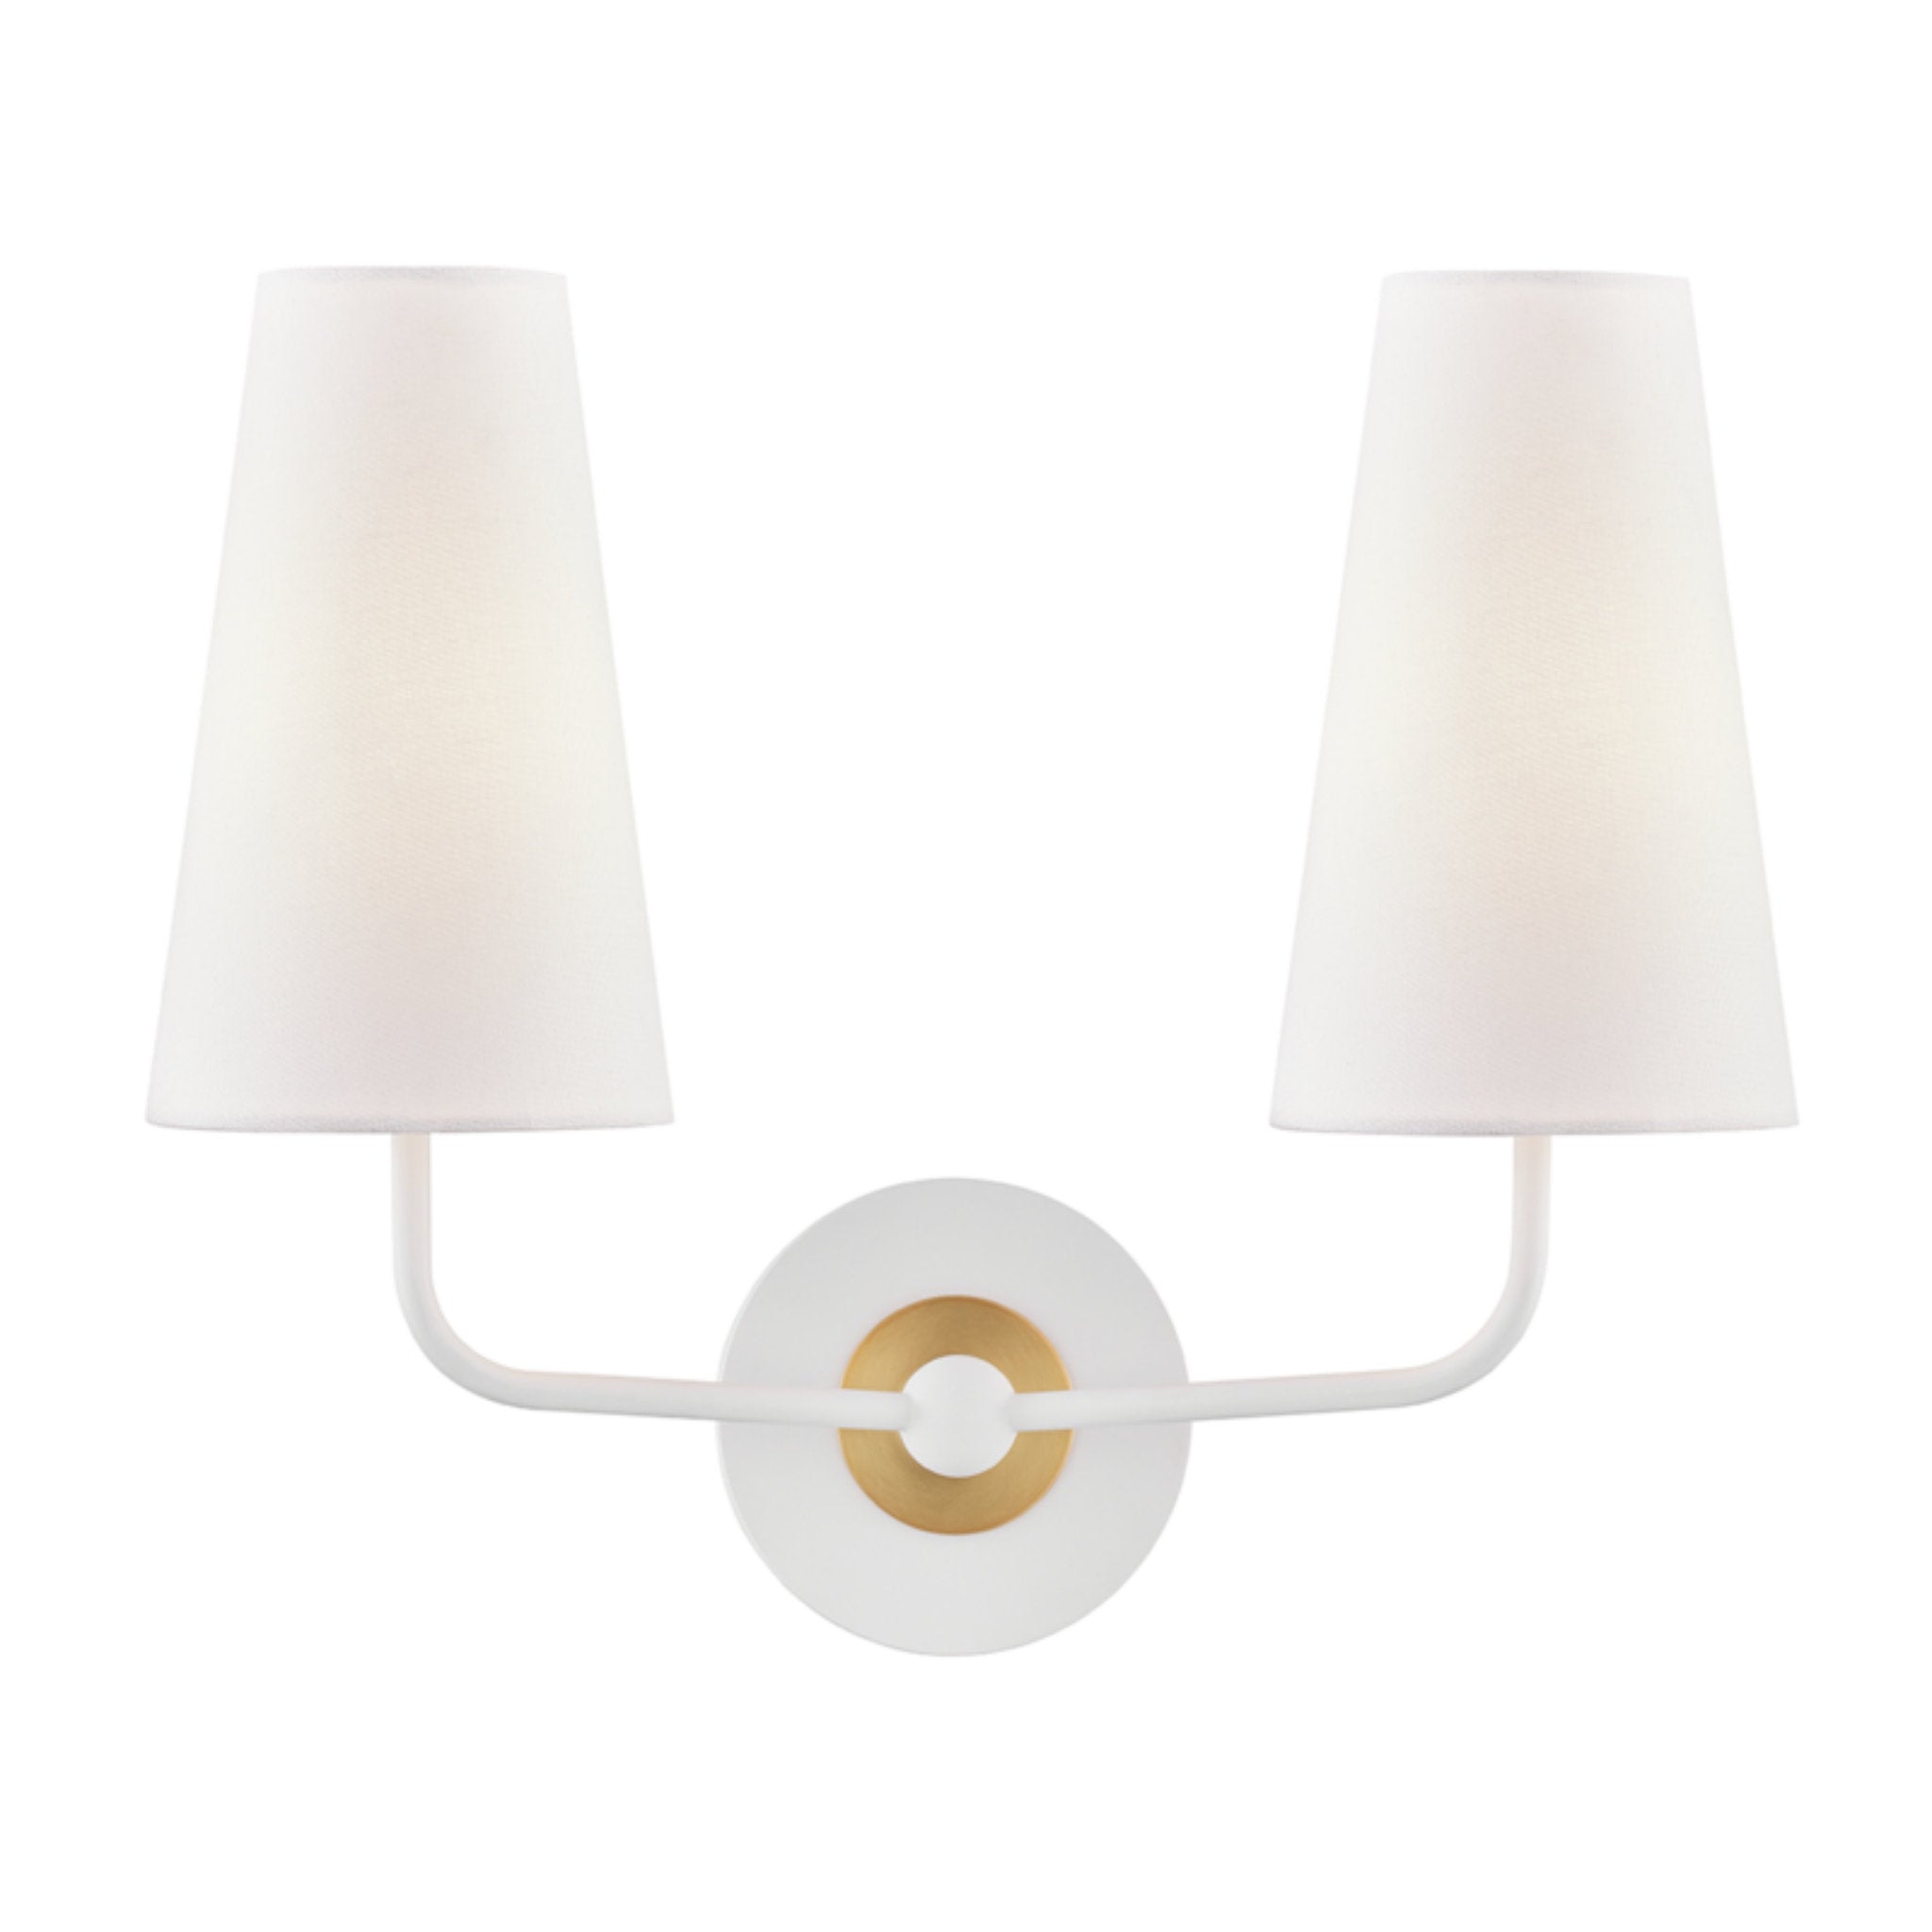 Merri 2-Light Wall Sconce in Aged Brass/Soft Off White